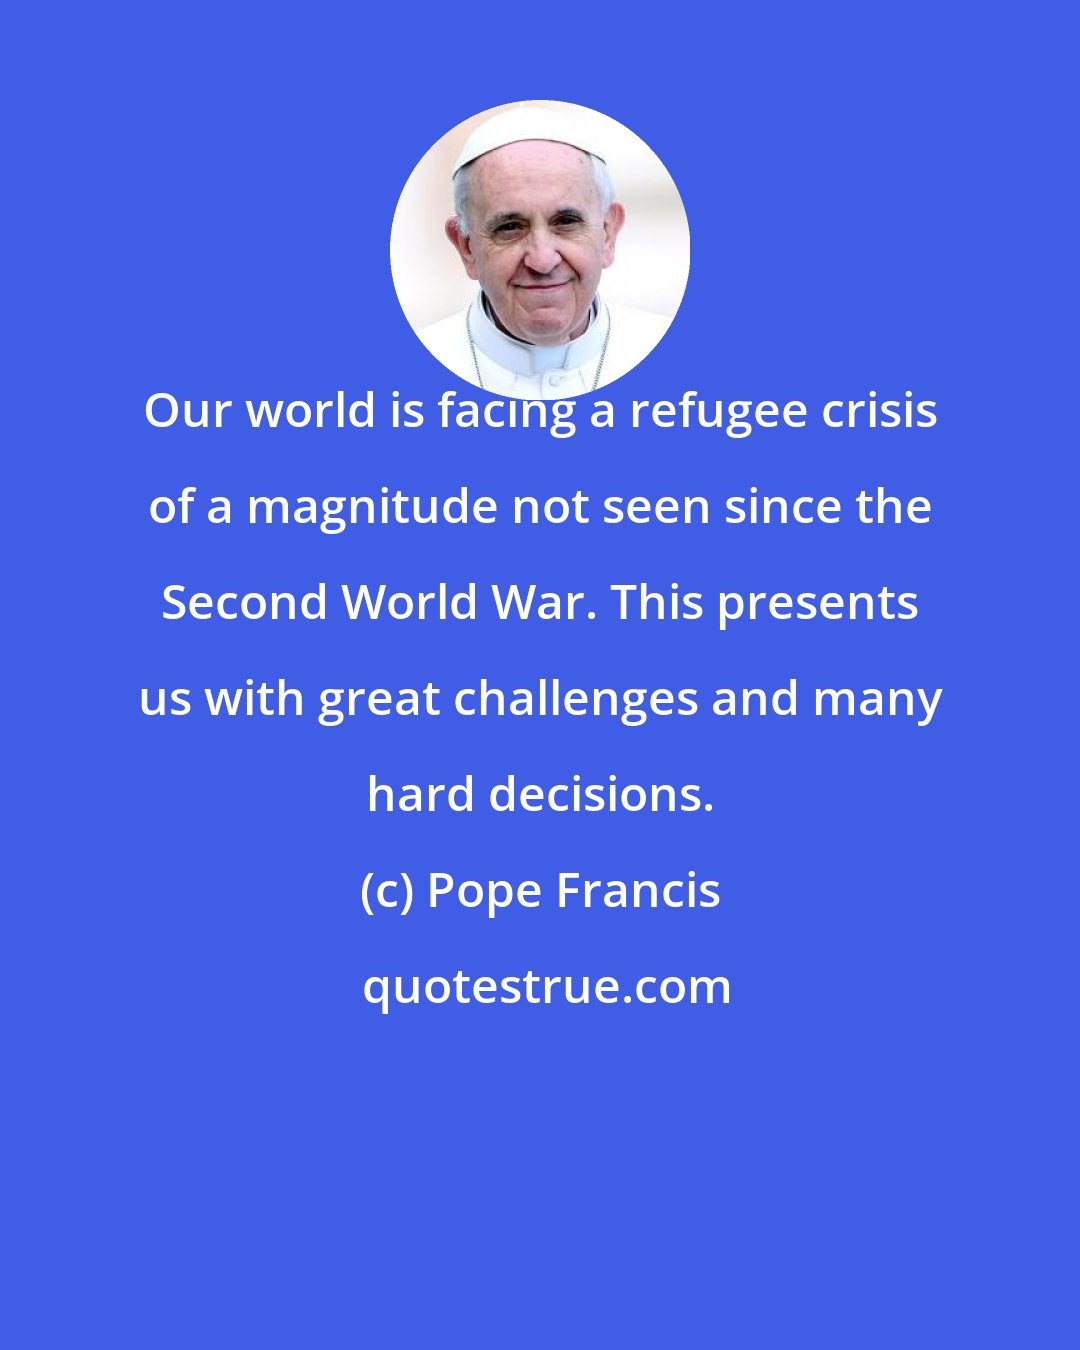 Pope Francis: Our world is facing a refugee crisis of a magnitude not seen since the Second World War. This presents us with great challenges and many hard decisions.